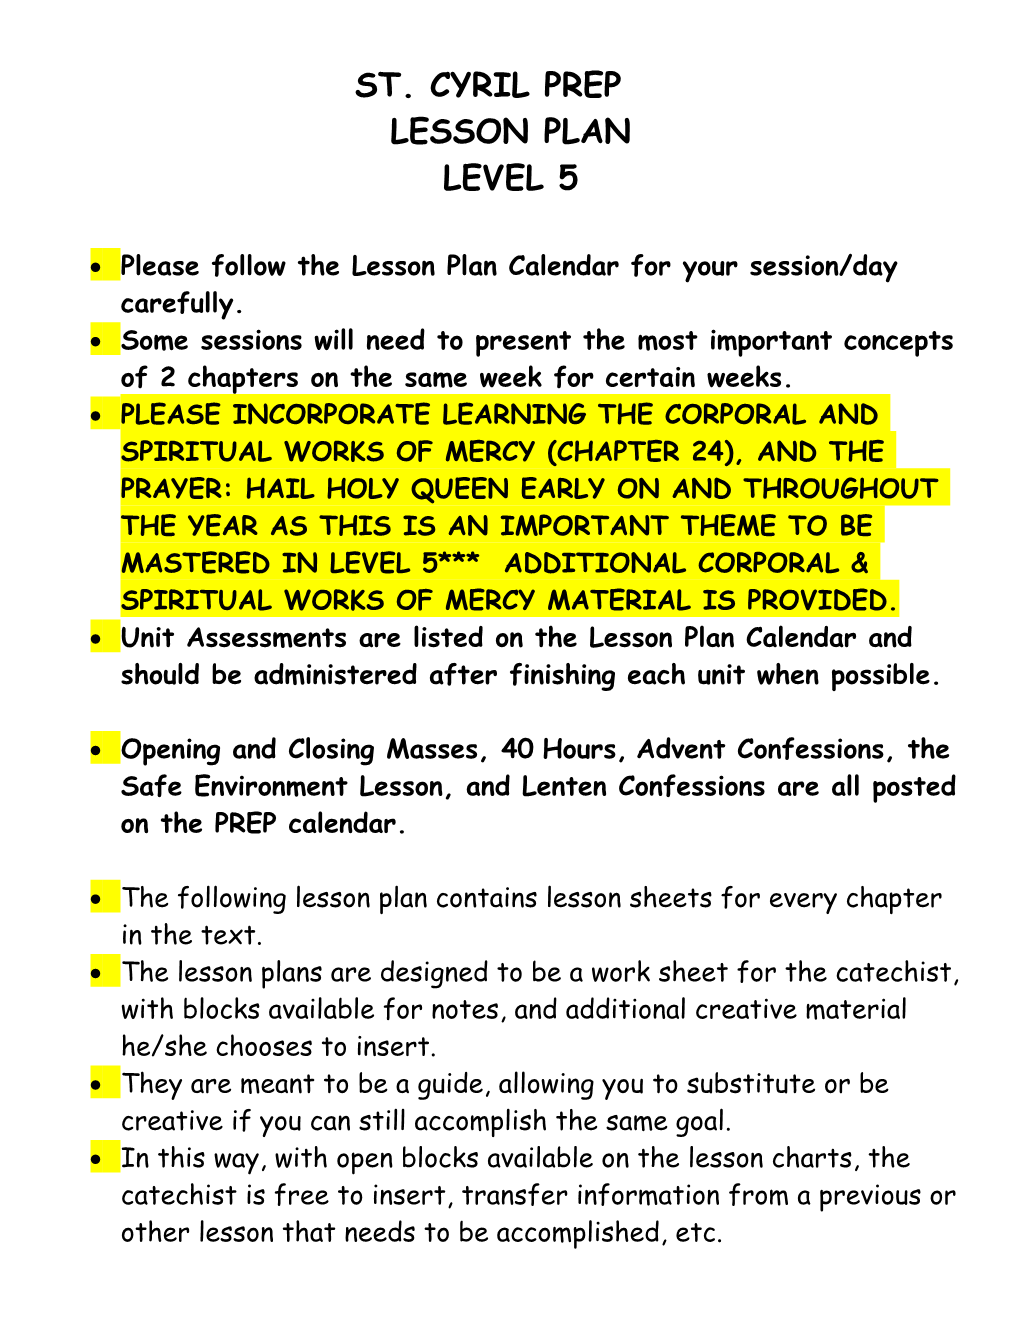 Please Follow the Lesson Plan Calendar for Your Session/Day Carefully